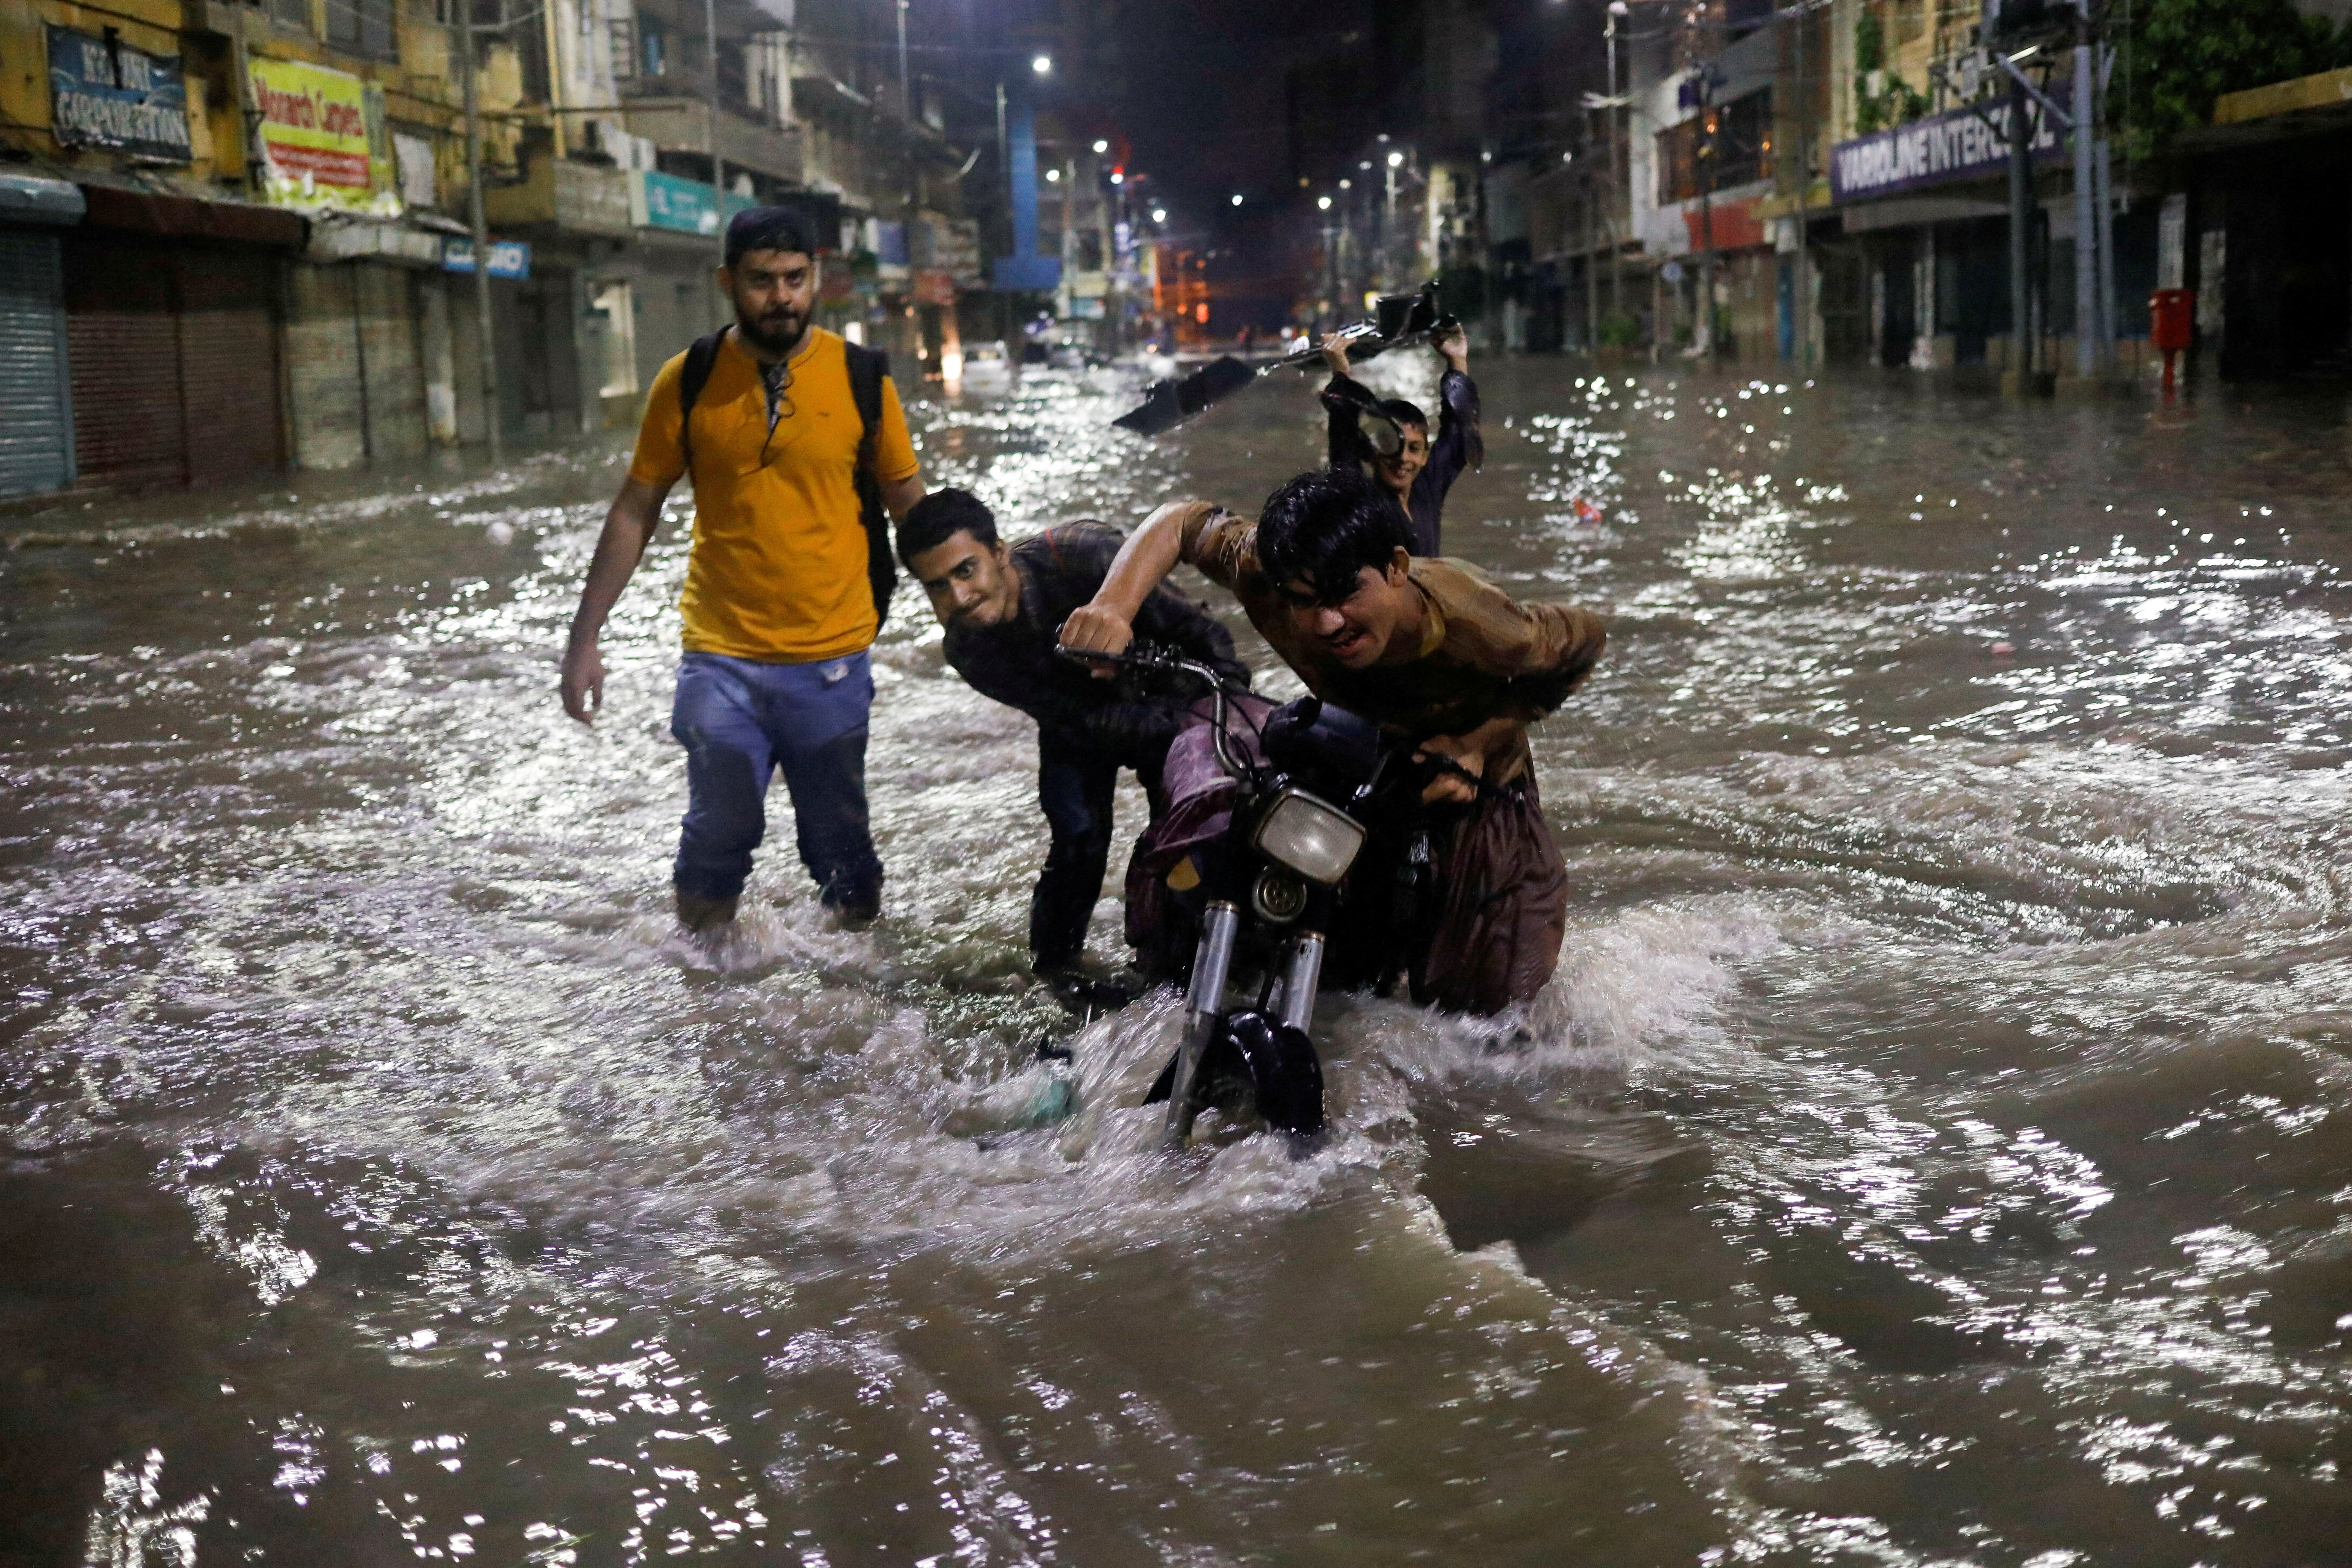 Boys push their motorcycle after it was stopped on a flooded street, following heavy rains during the monsoon season in Karachi